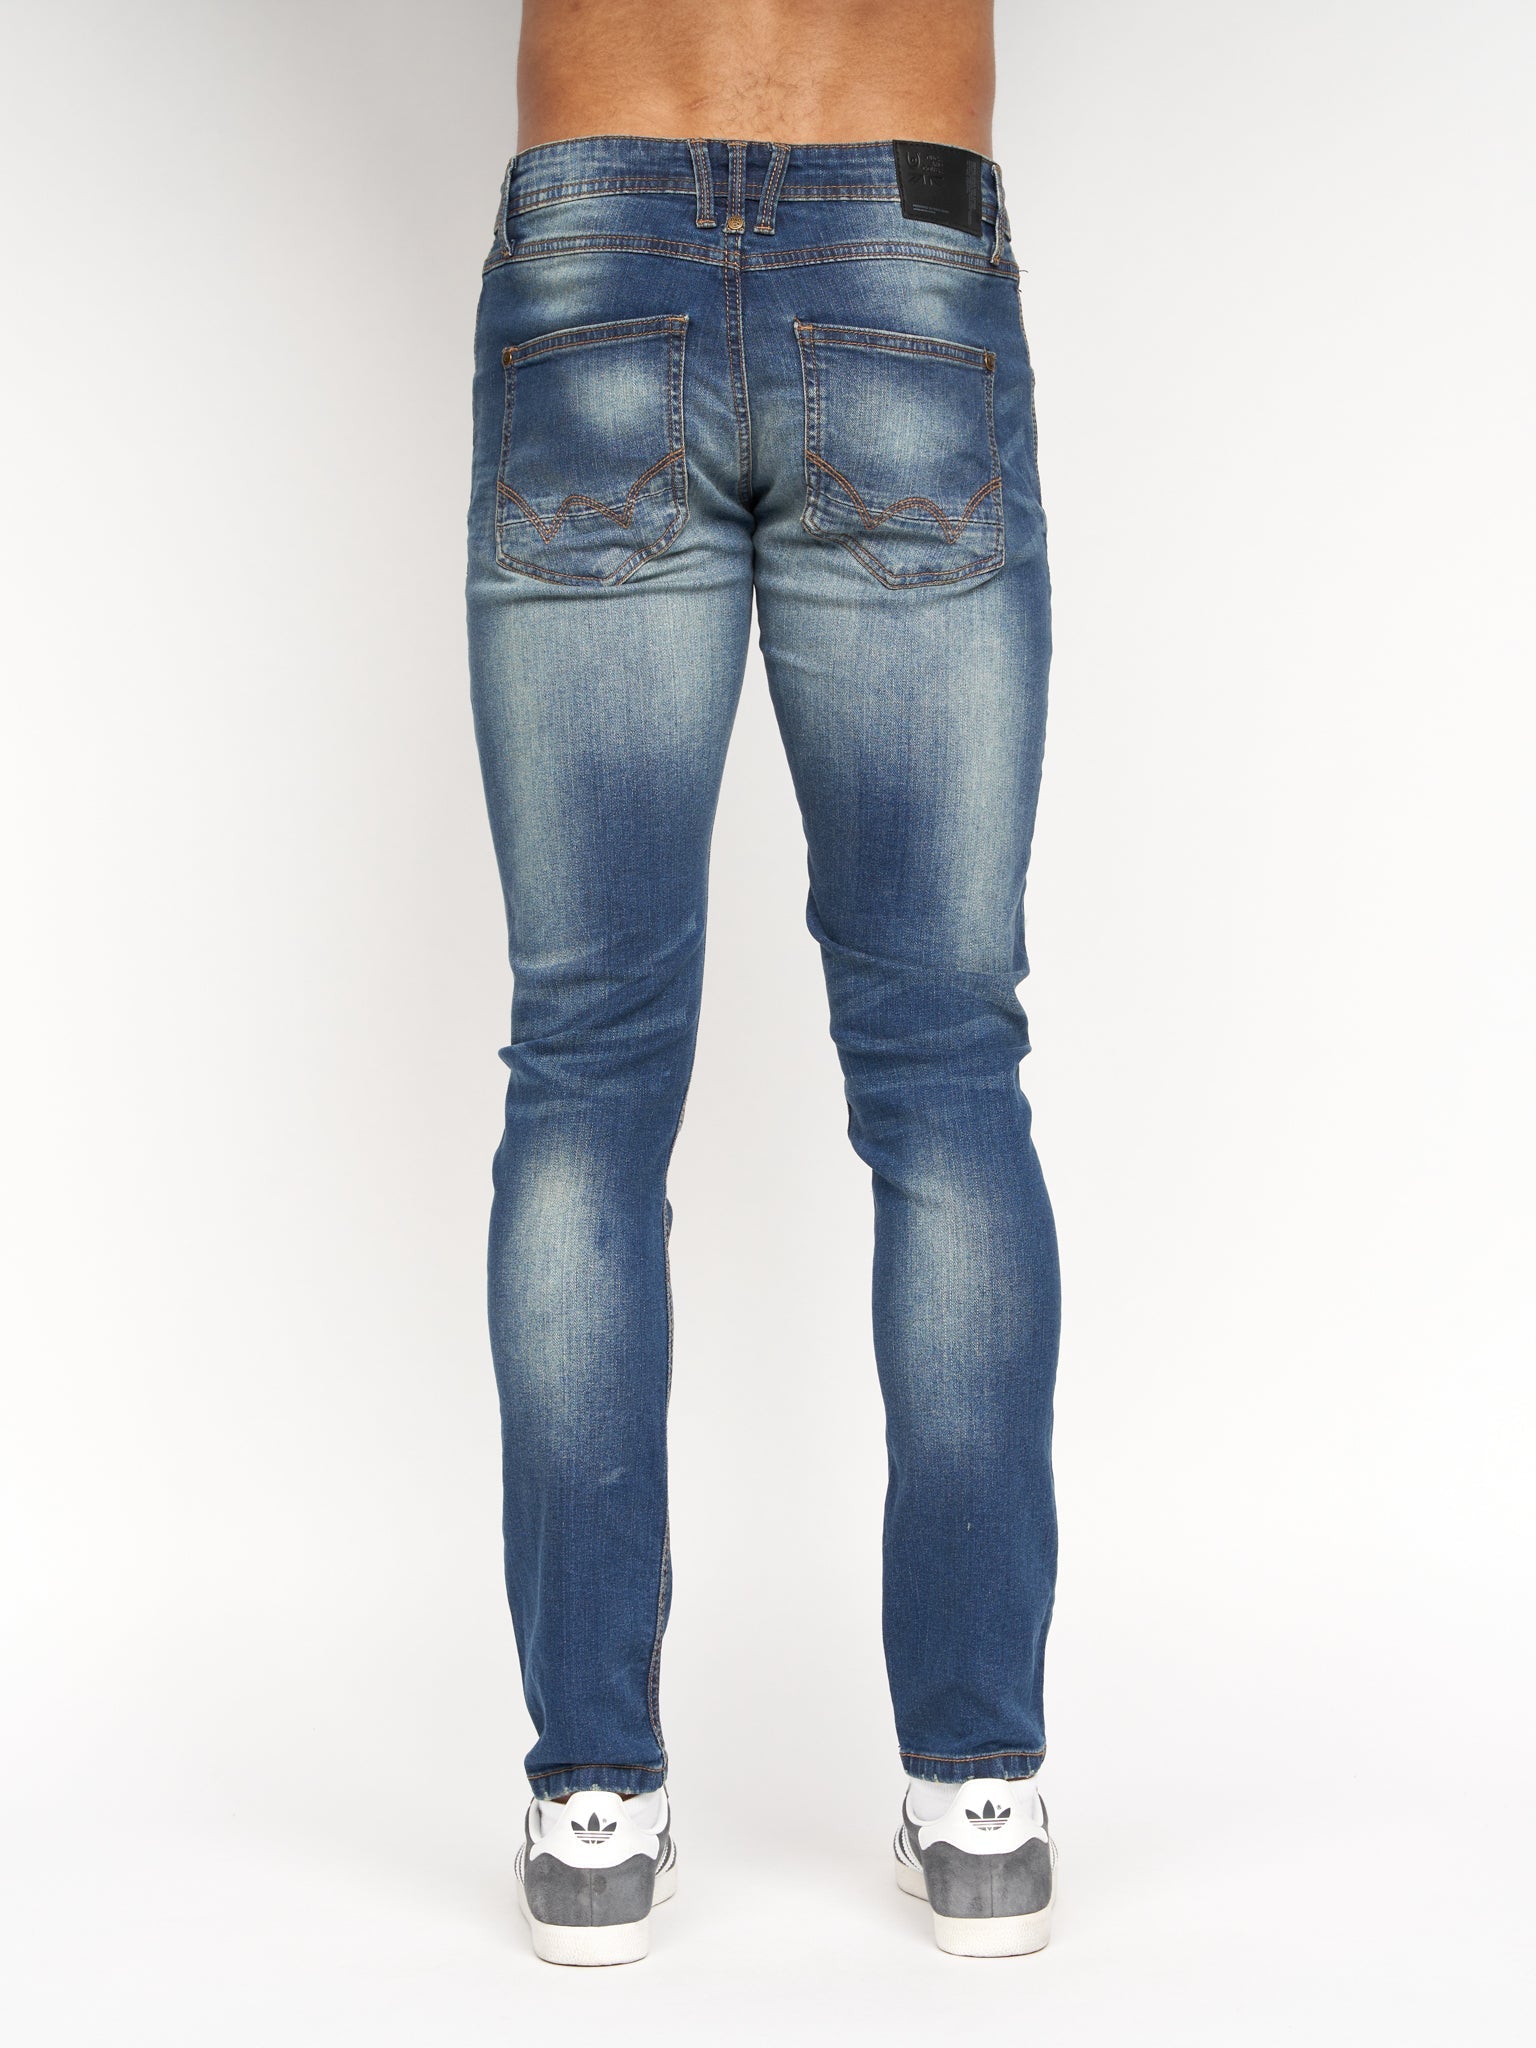 Tranfold Slim Fit Jeans Tinted Blue